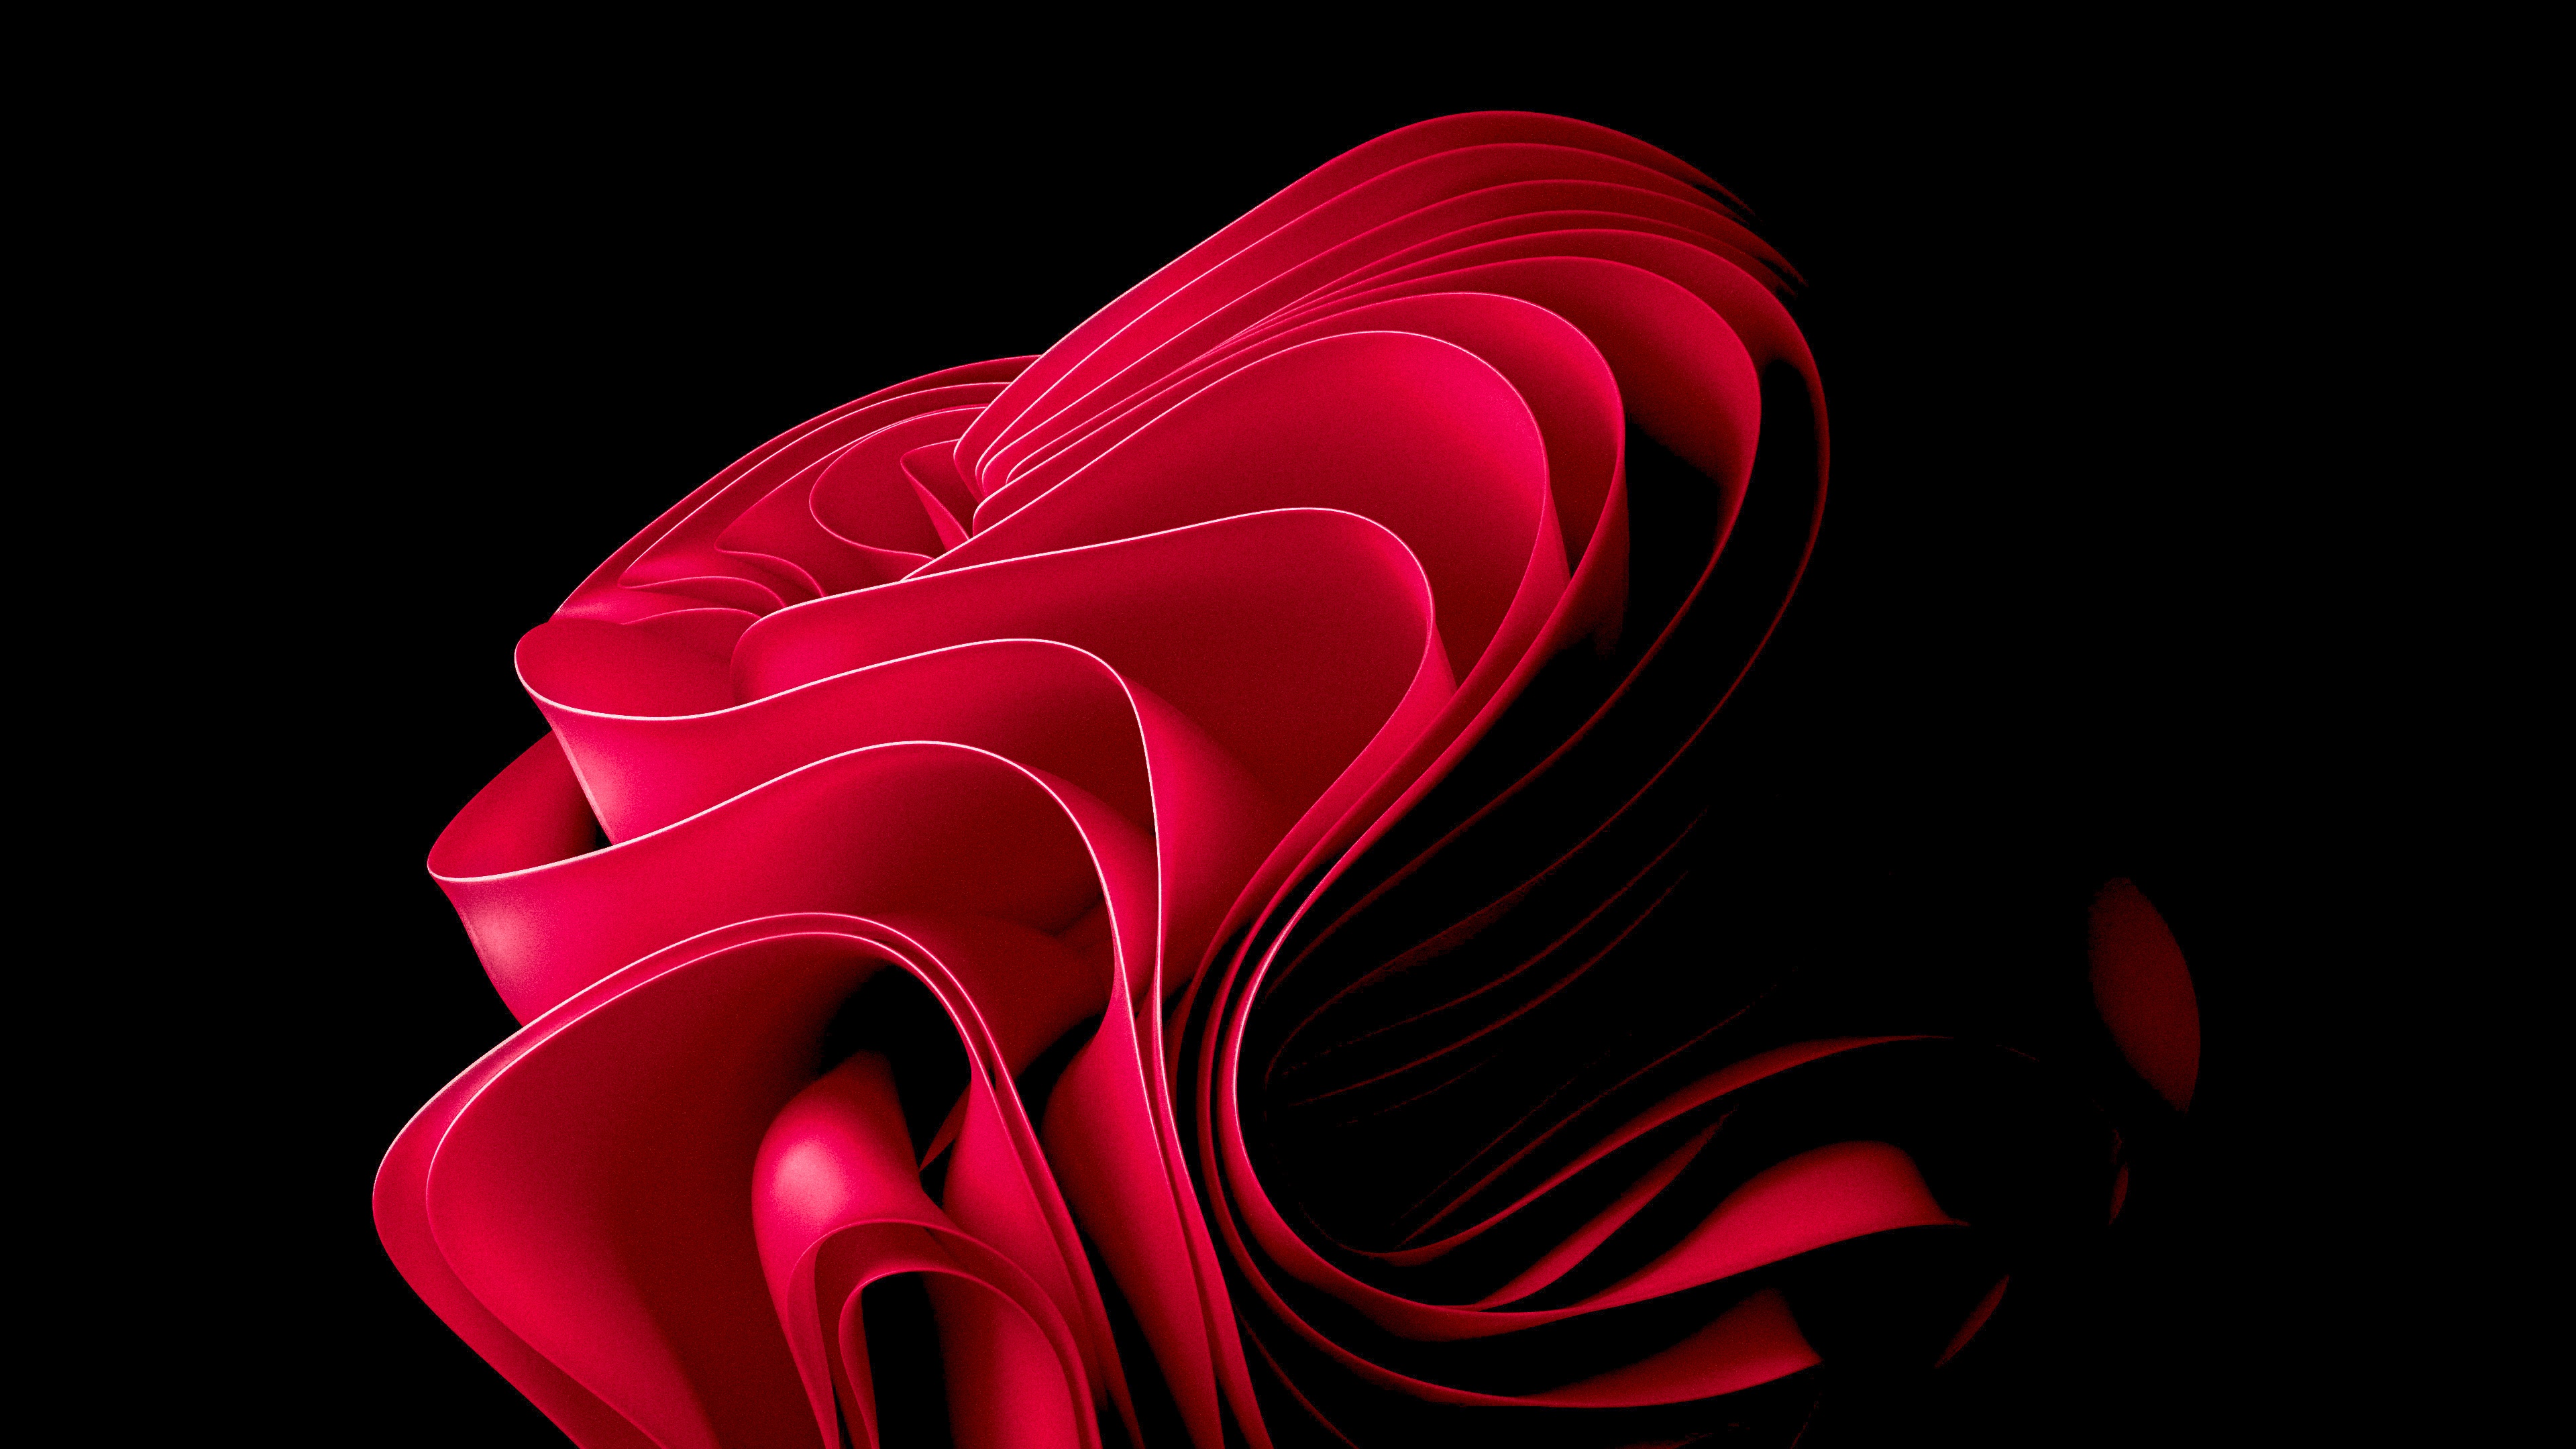 Windows 11 Wallpaper 4K, Stock, Red abstract, Abstract, #9058